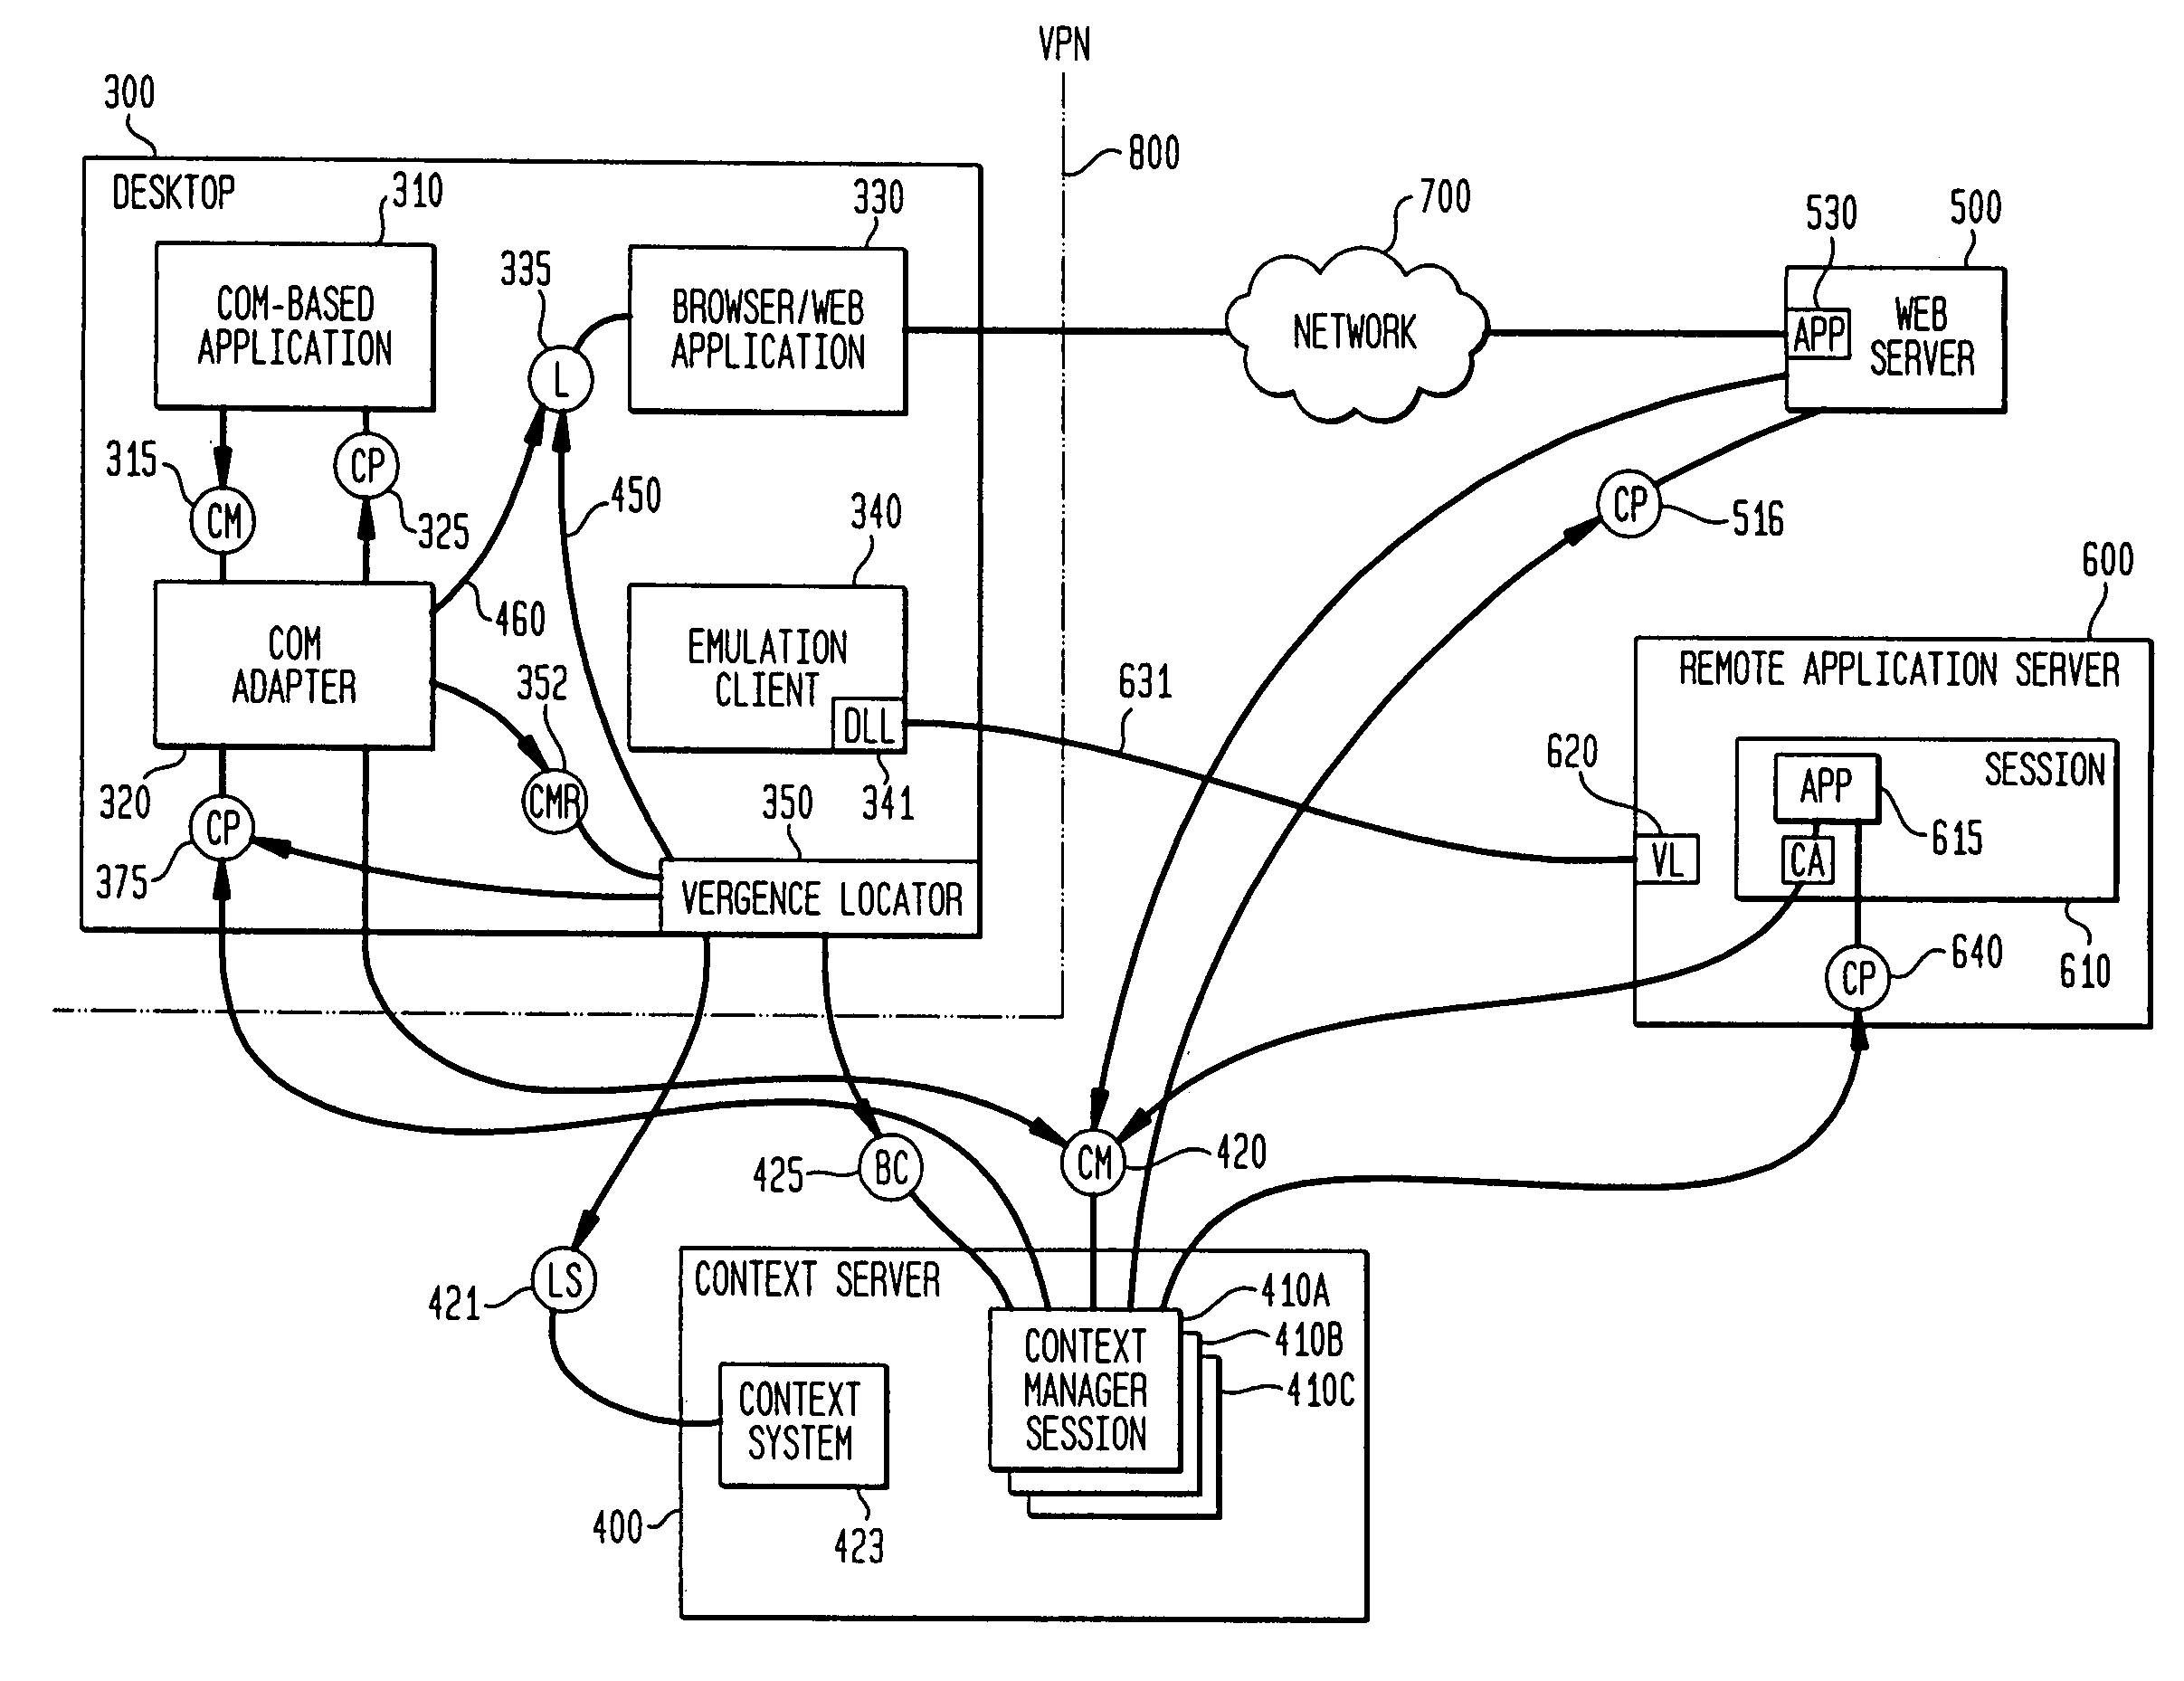 Methods and apparatus for performing context management in a networked environment